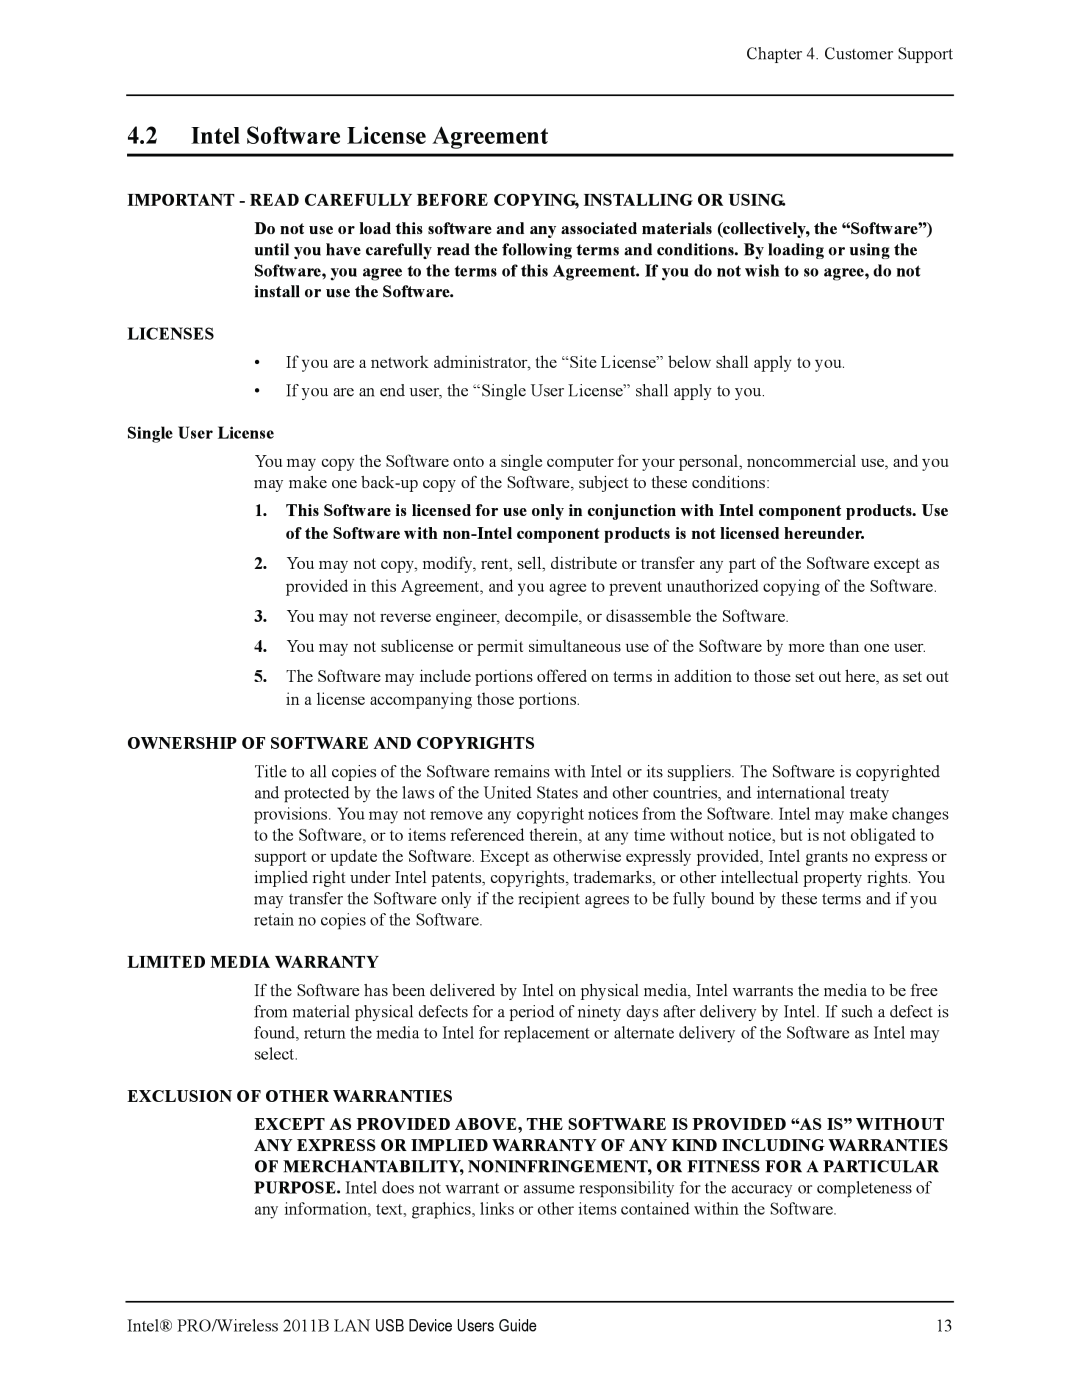 Intel 2011B manual 4.2Intel Software License Agreement, Licenses, Single User License, Ownership Of Software And Copyrights 